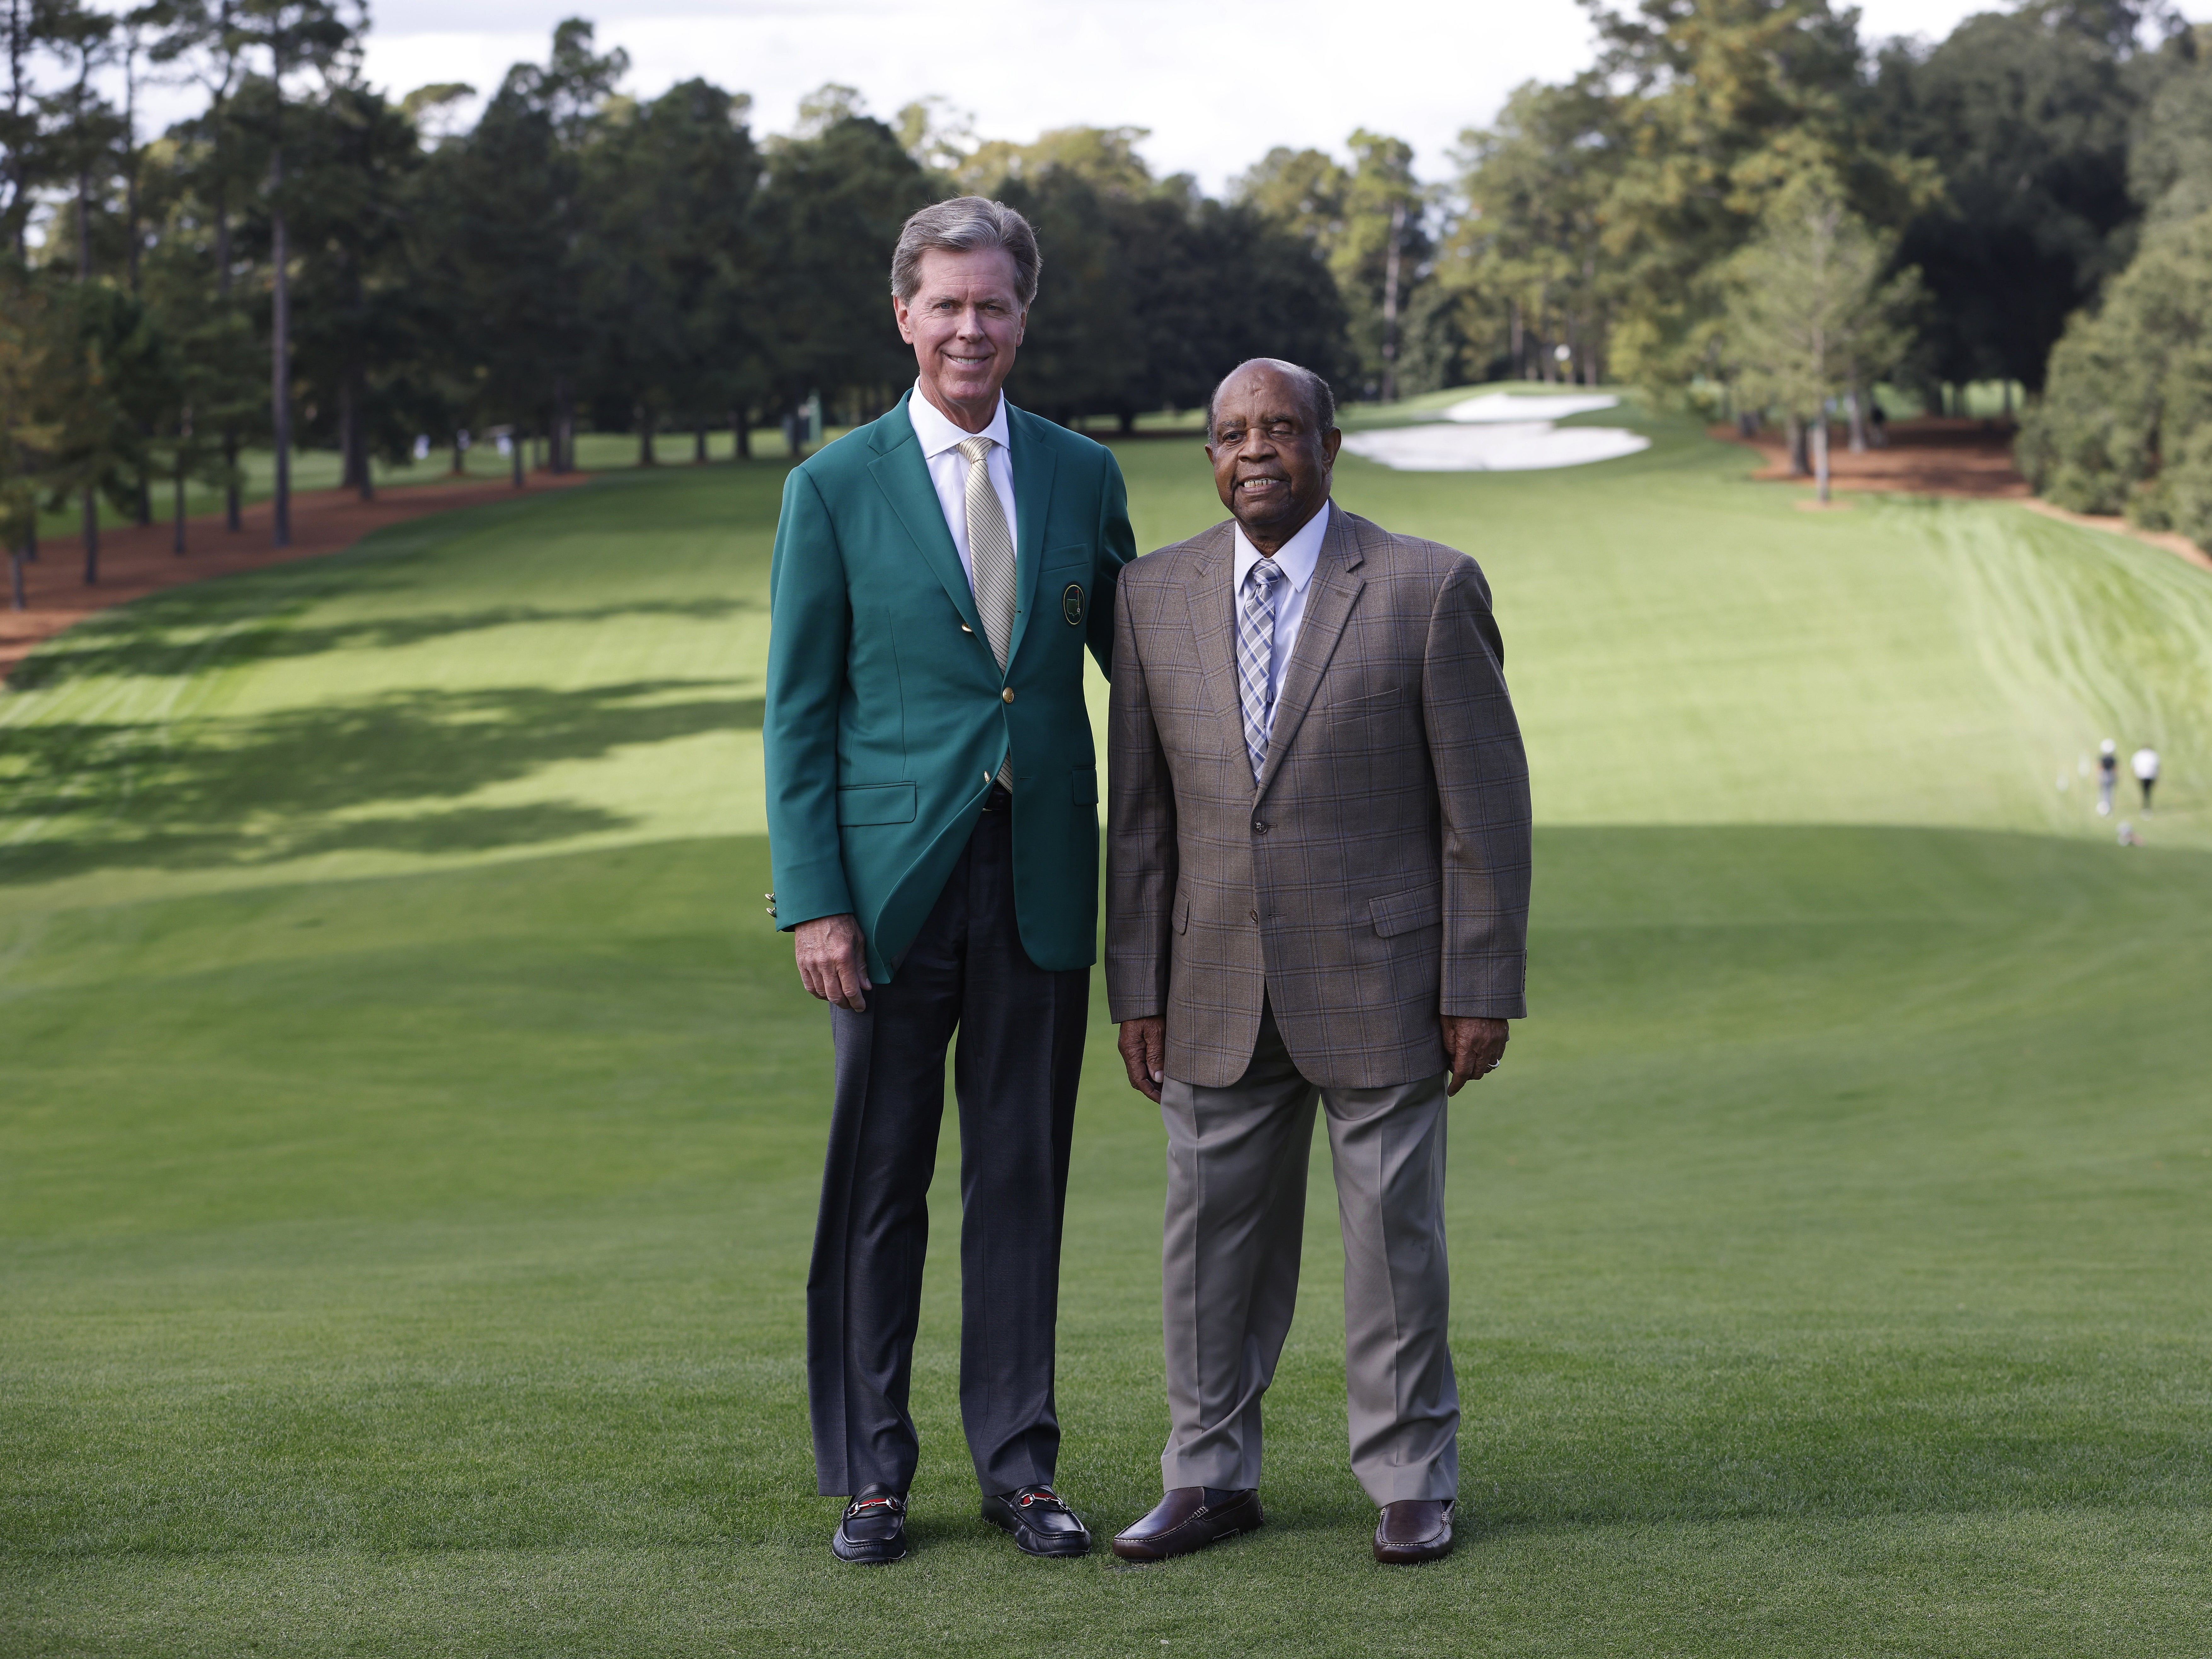 The Masters 2020 At Augusta, golf starts to confront its racist history The Independent